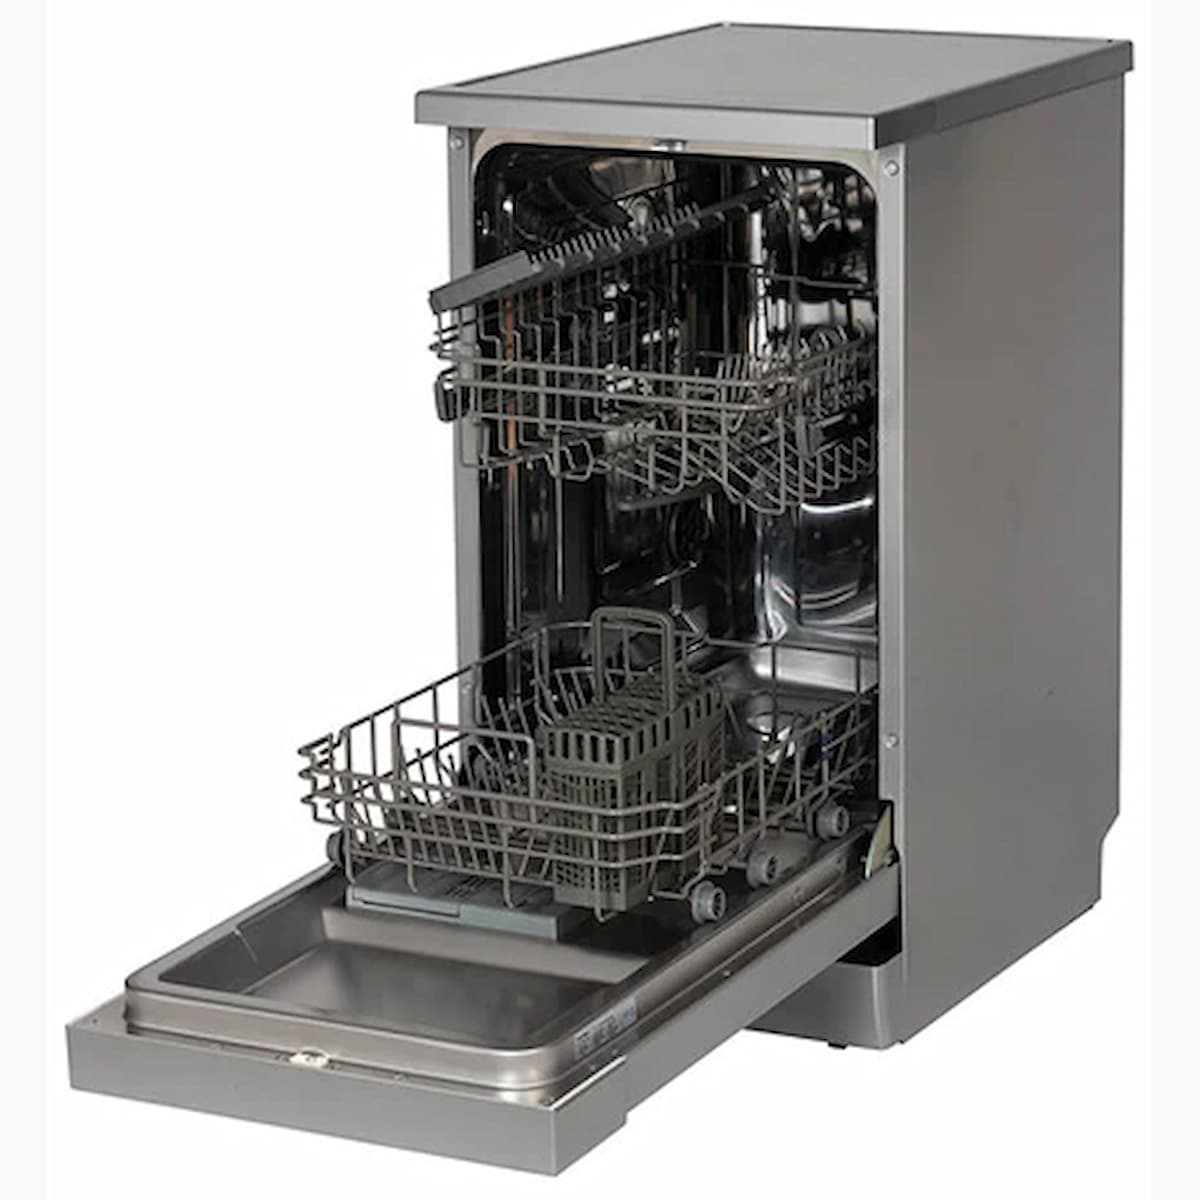 PowerPoint 45cm Dishwasher Stainless Steel-P24510M6SS